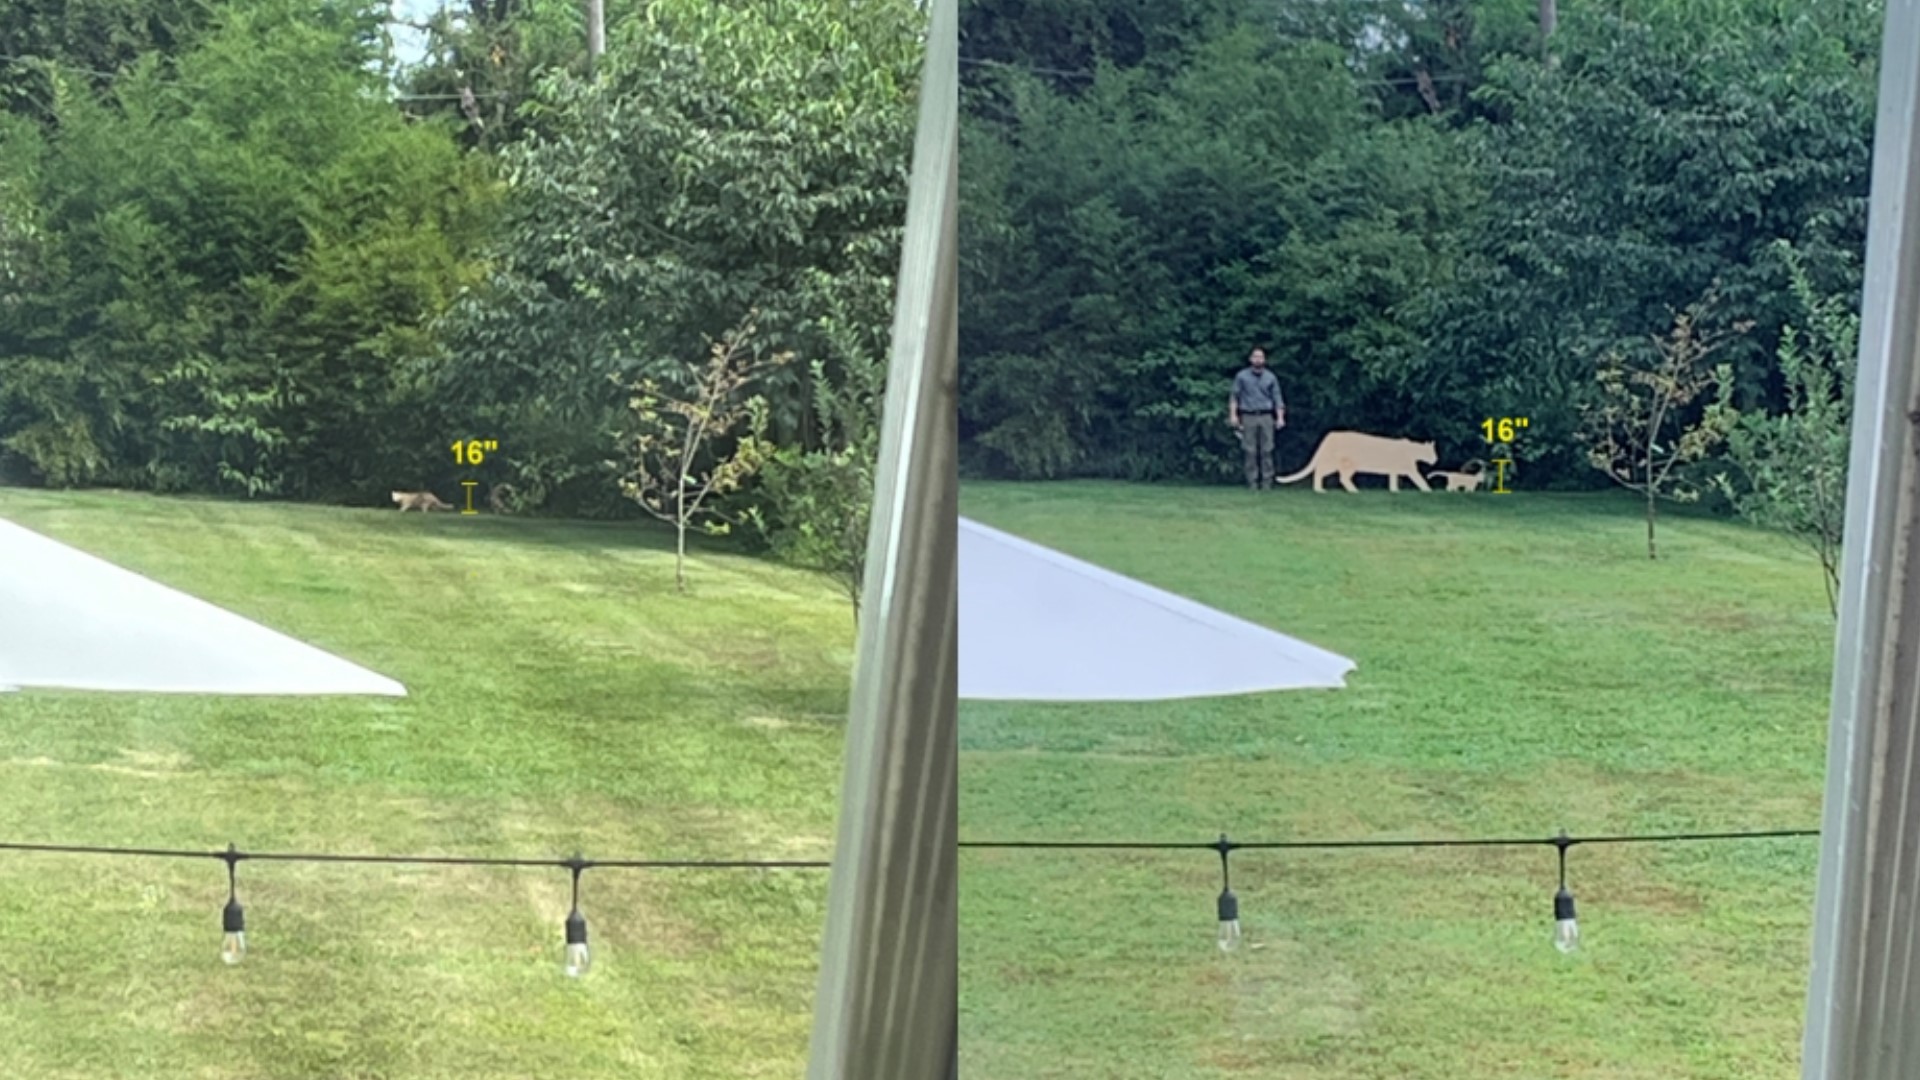 Game Commission officials were able to identify the animals and even went out to the cemetery to show what it would look like if a larger cat were spotted.